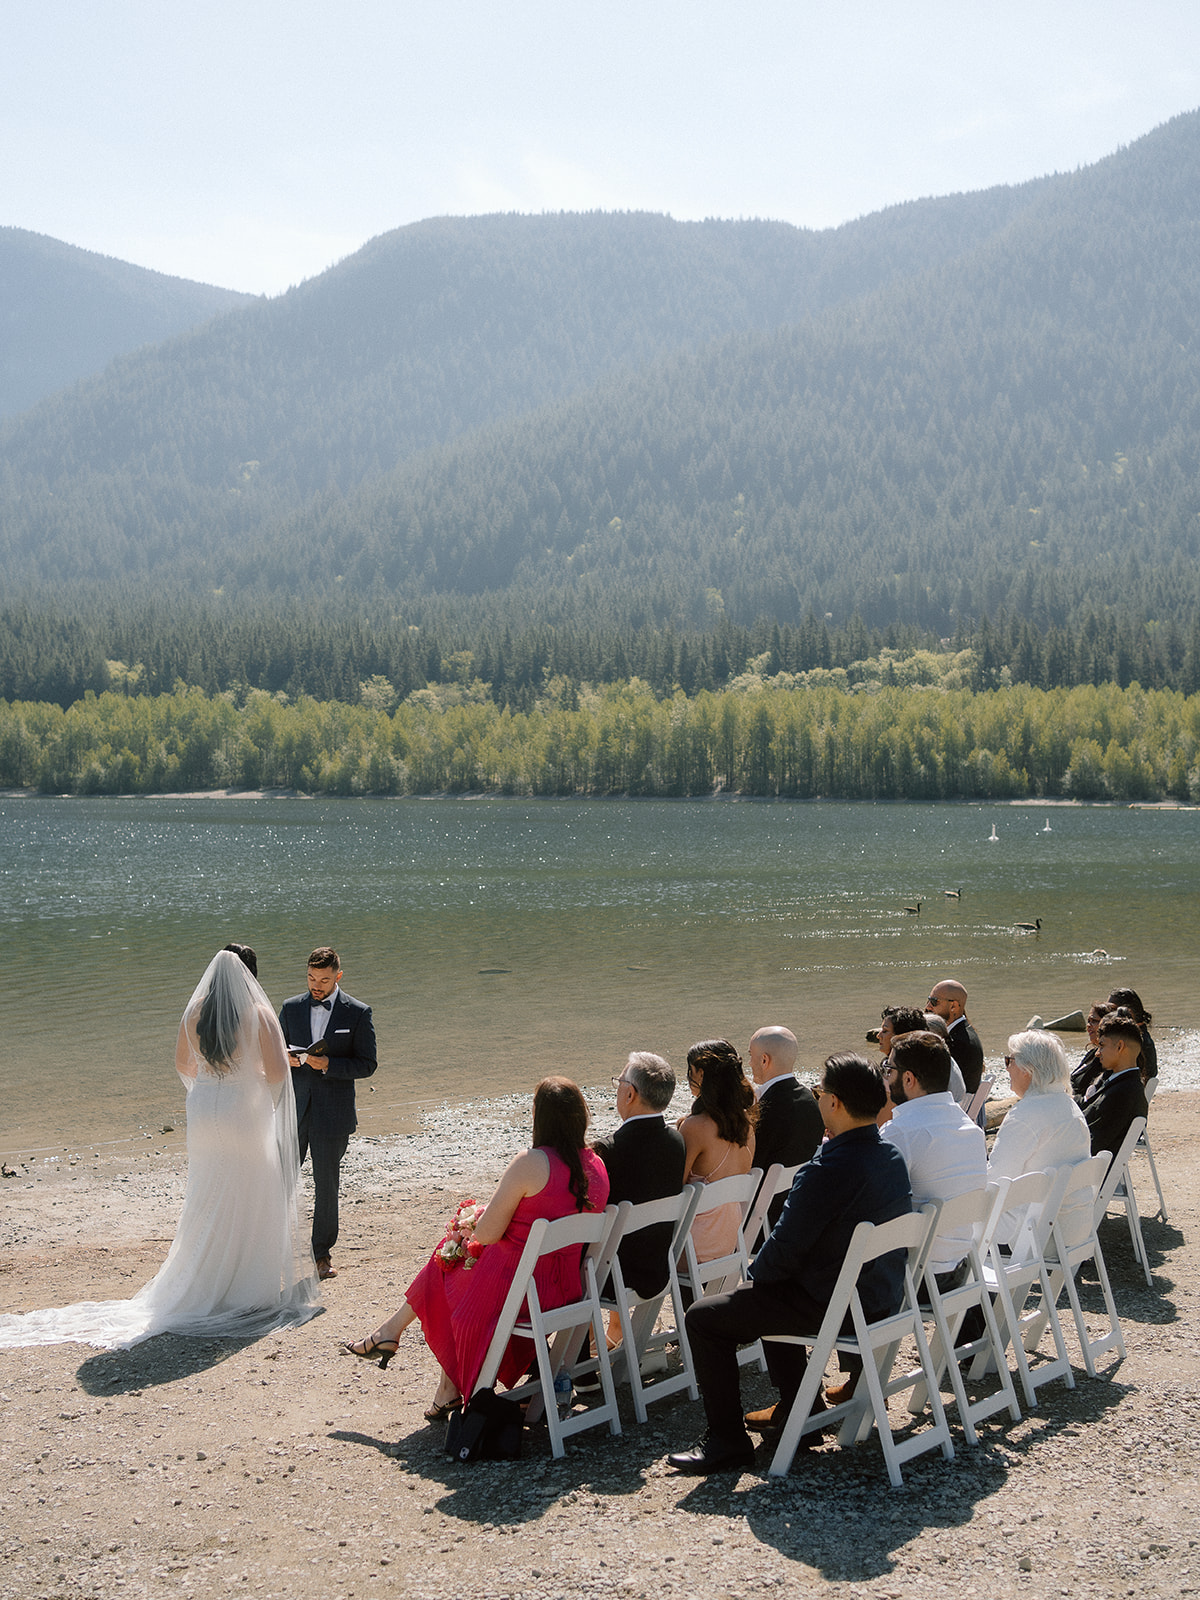 Elopement ceremony by Alouette lake in Golden Ears Park British Columbia